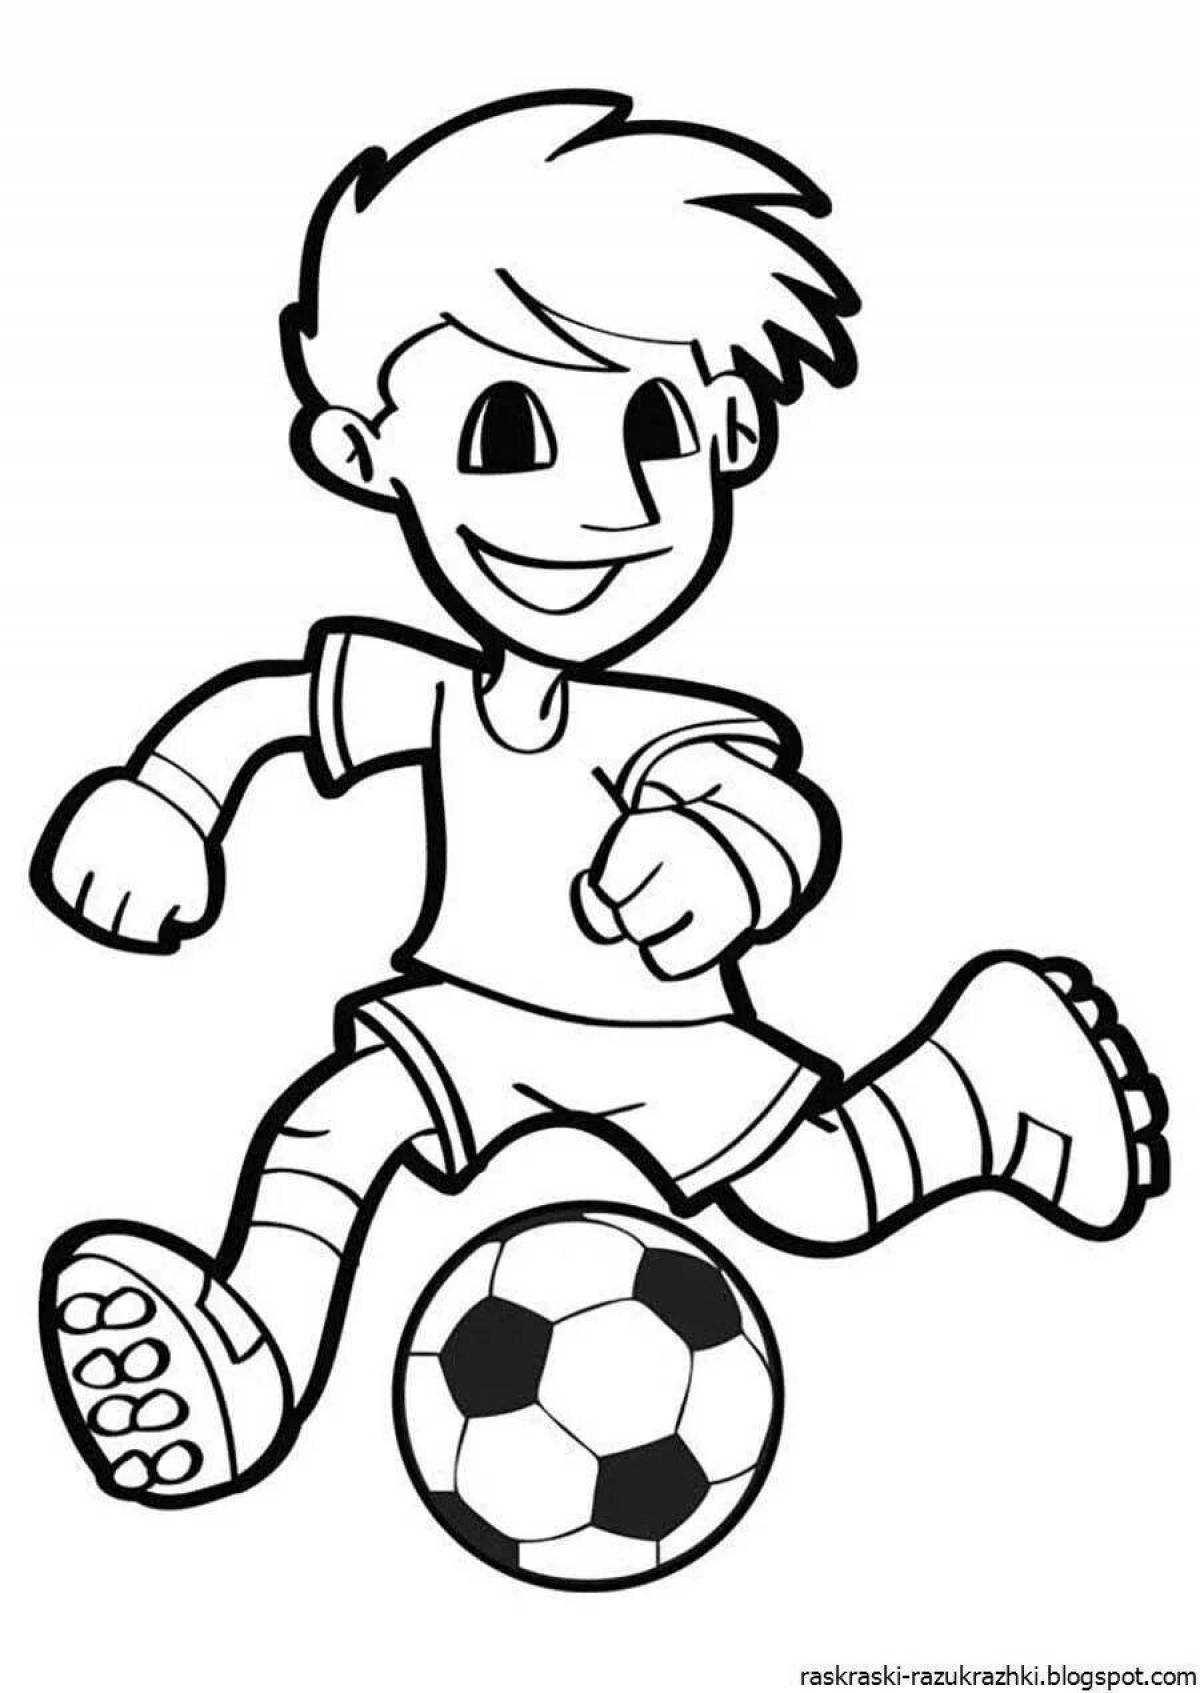 Coloring page exciting football players